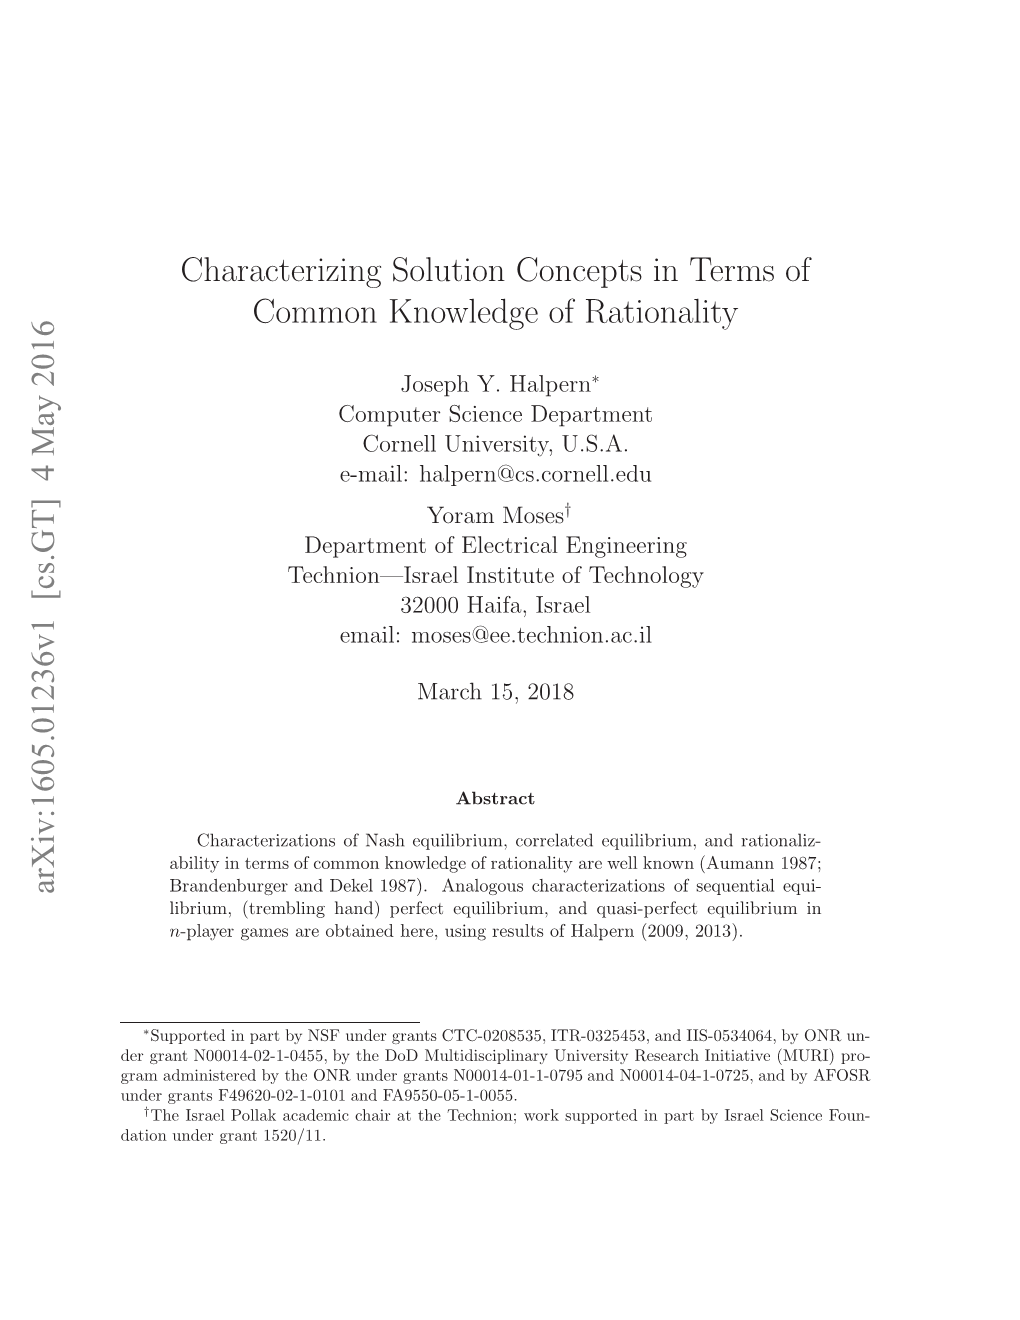 Characterizing Solution Concepts in Terms of Common Knowledge Of